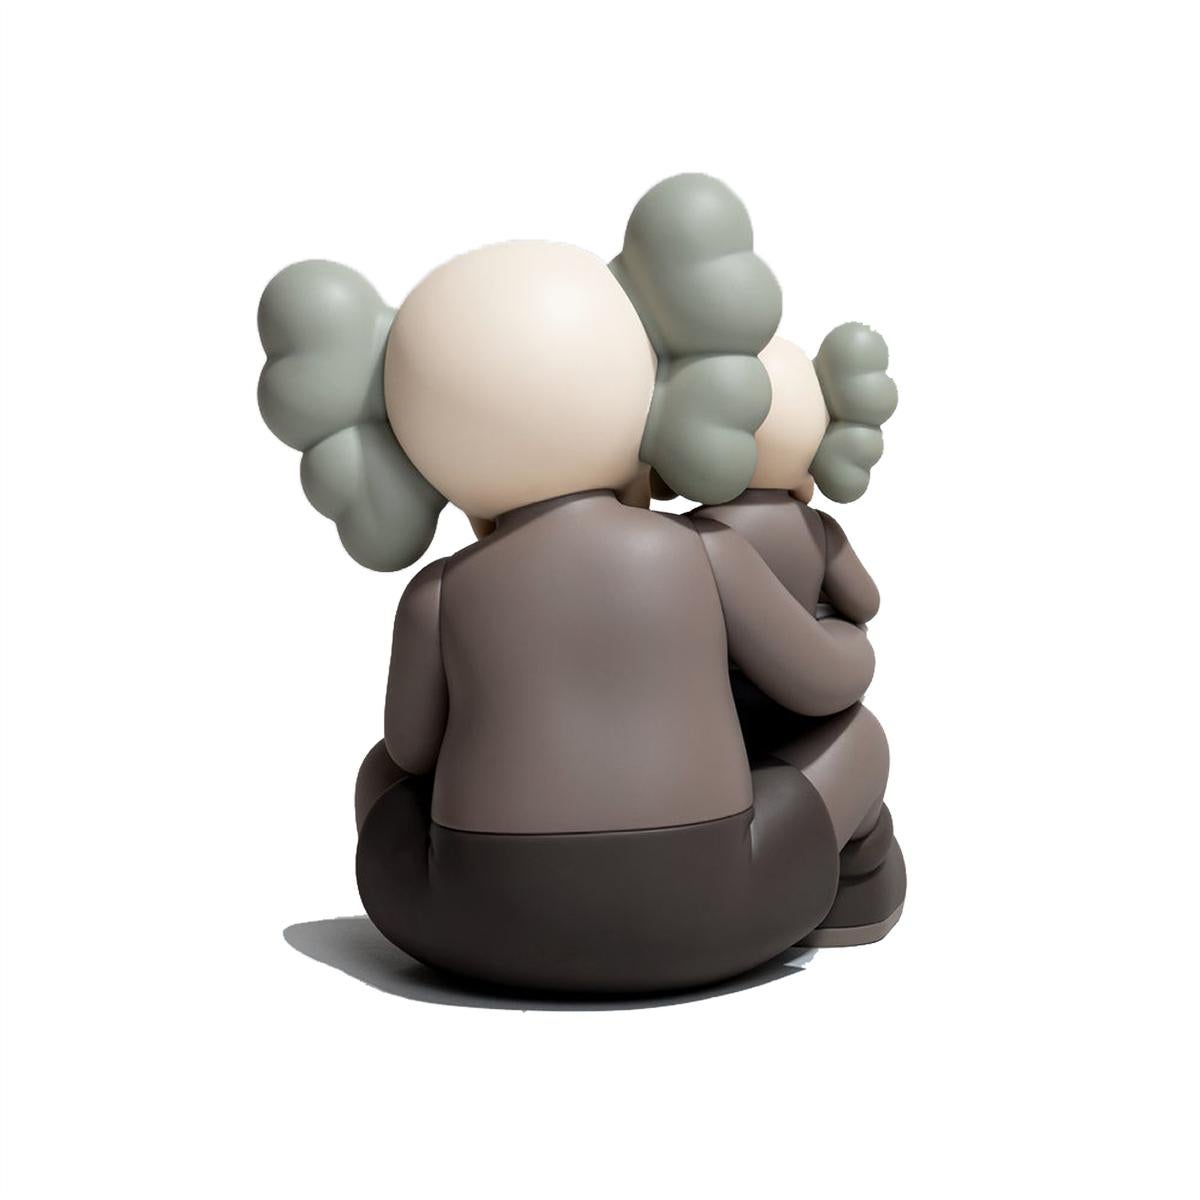 KAWS Holiday Changbai Mountain (KAWS brown Changbai):
A beautifully composed KAWS COMPANION published to commemorate KAWS' larger-scale sculpture of same, at Changbai Mountain in Jilin Province, China. The piece features the signature KAWS Companion